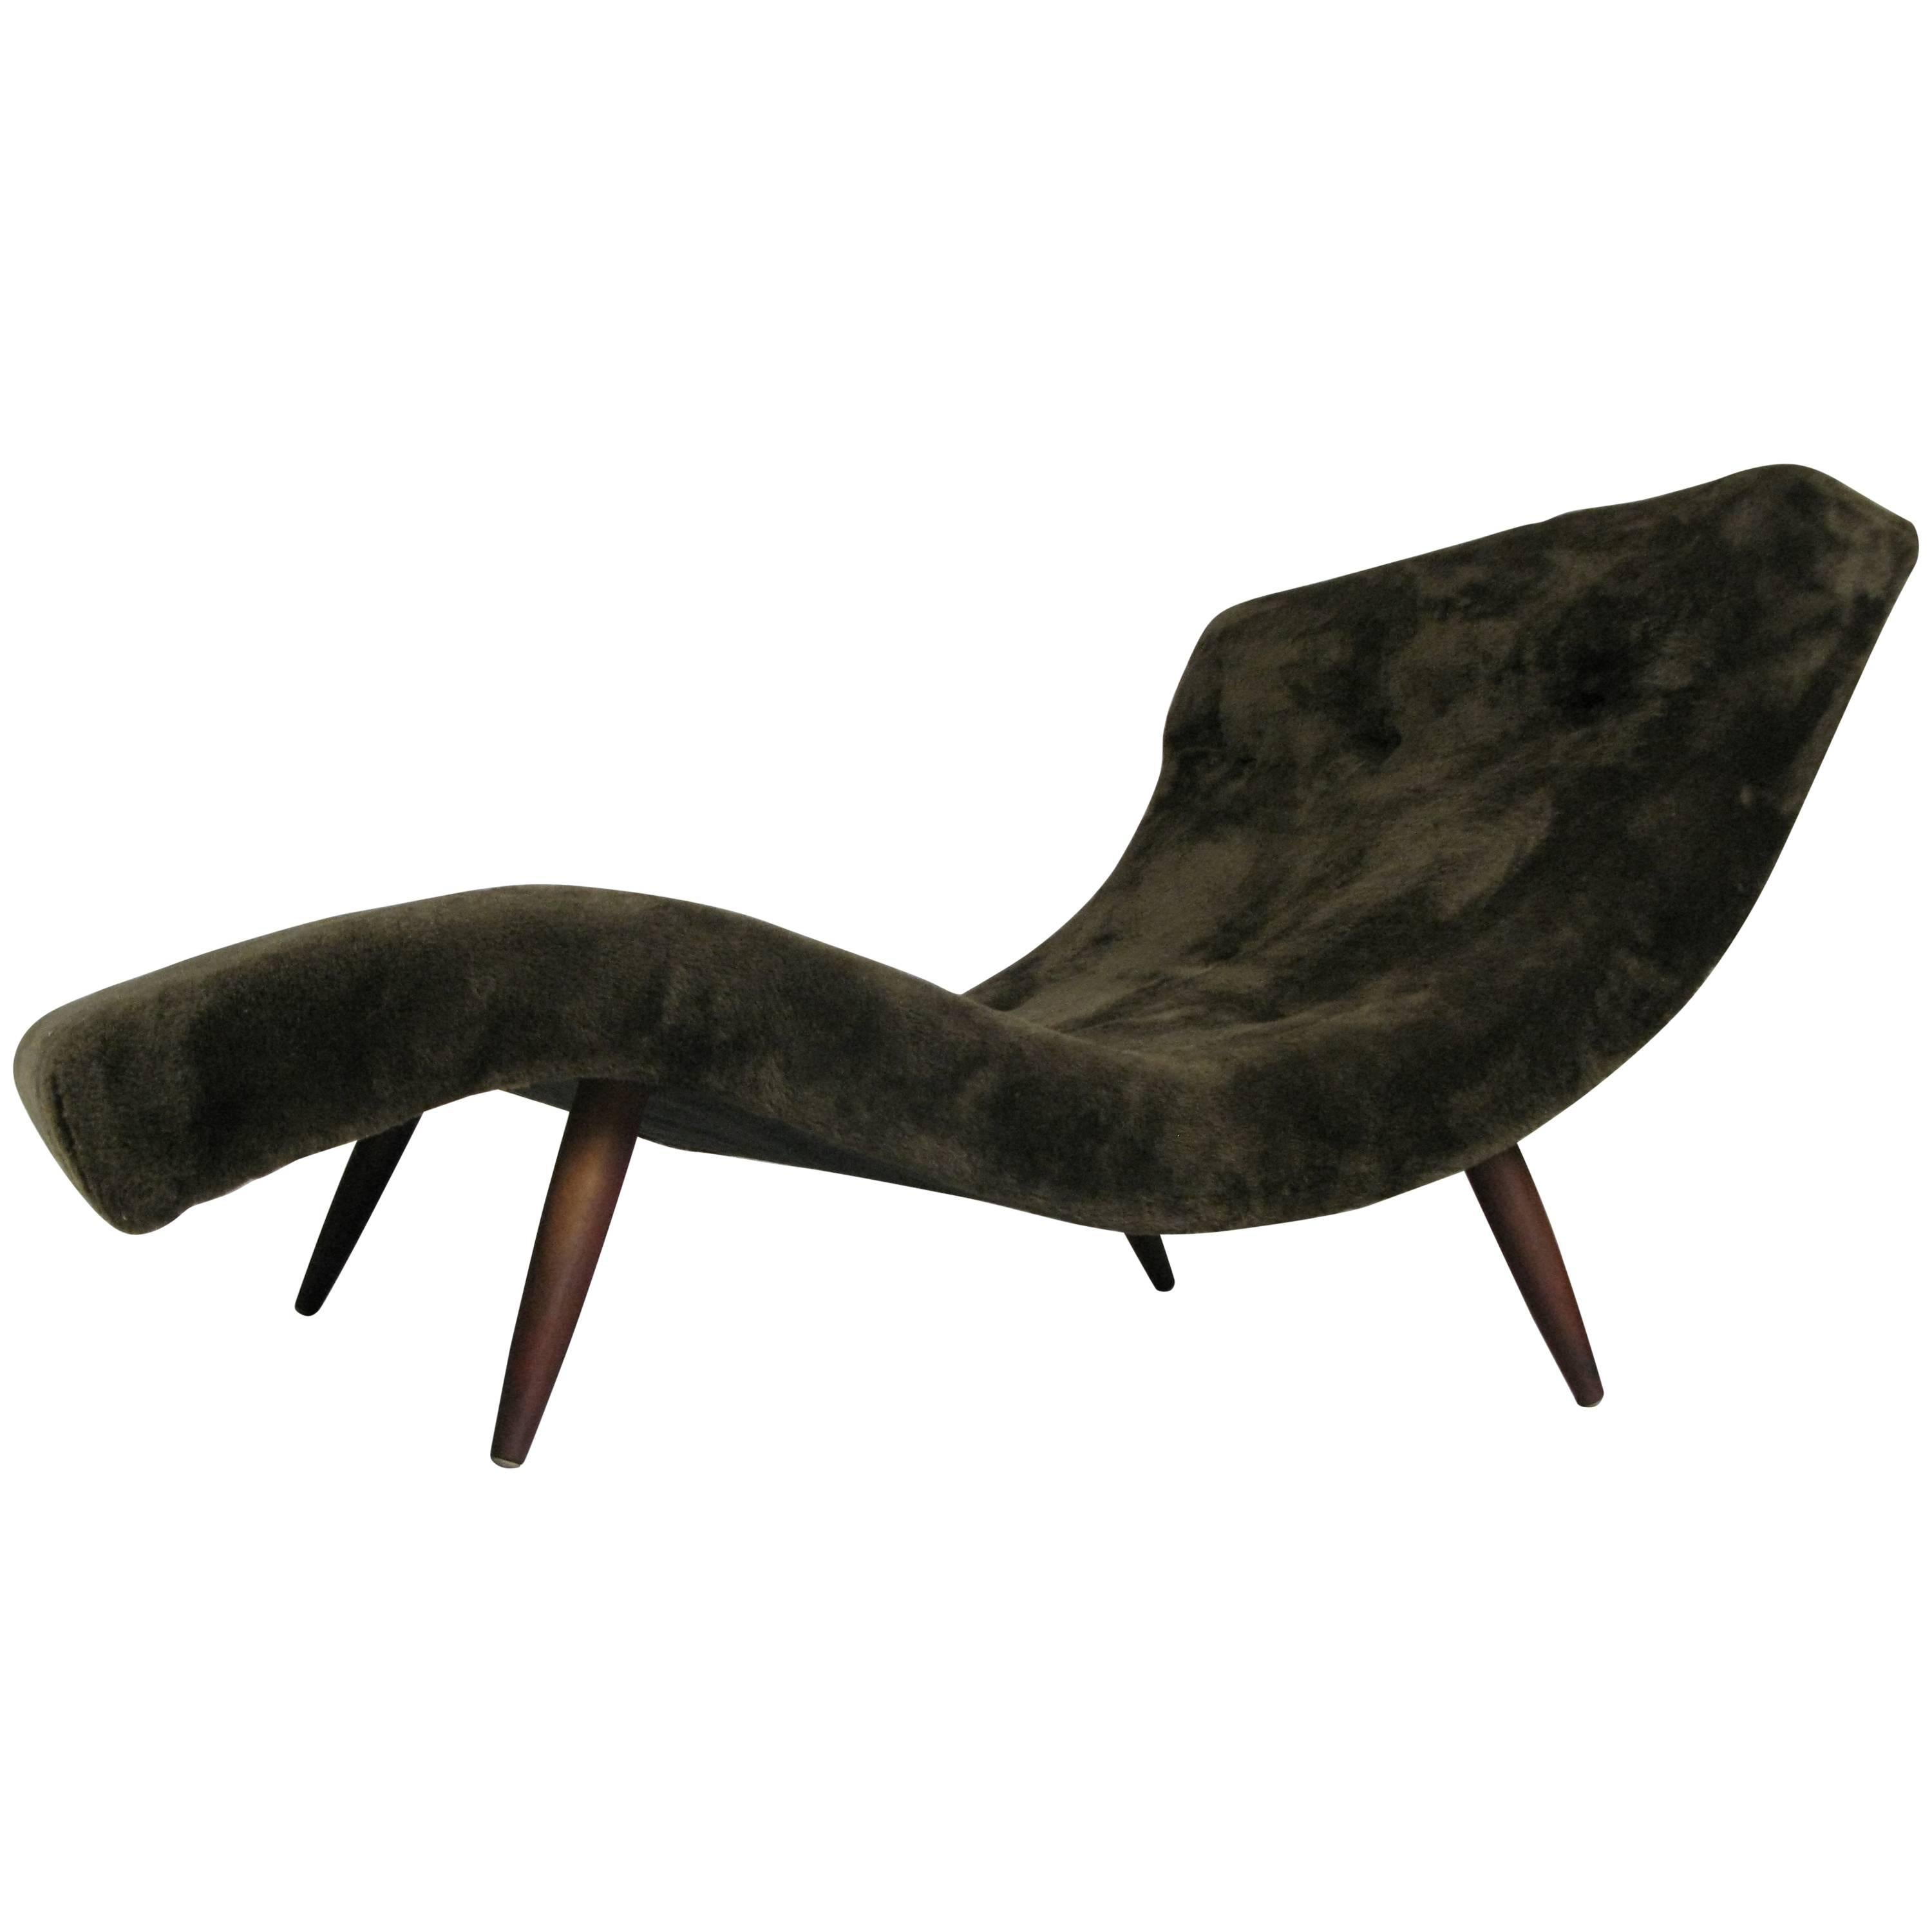 Vintage 1960s Curved Chaise Longue by Adrian Pearsall